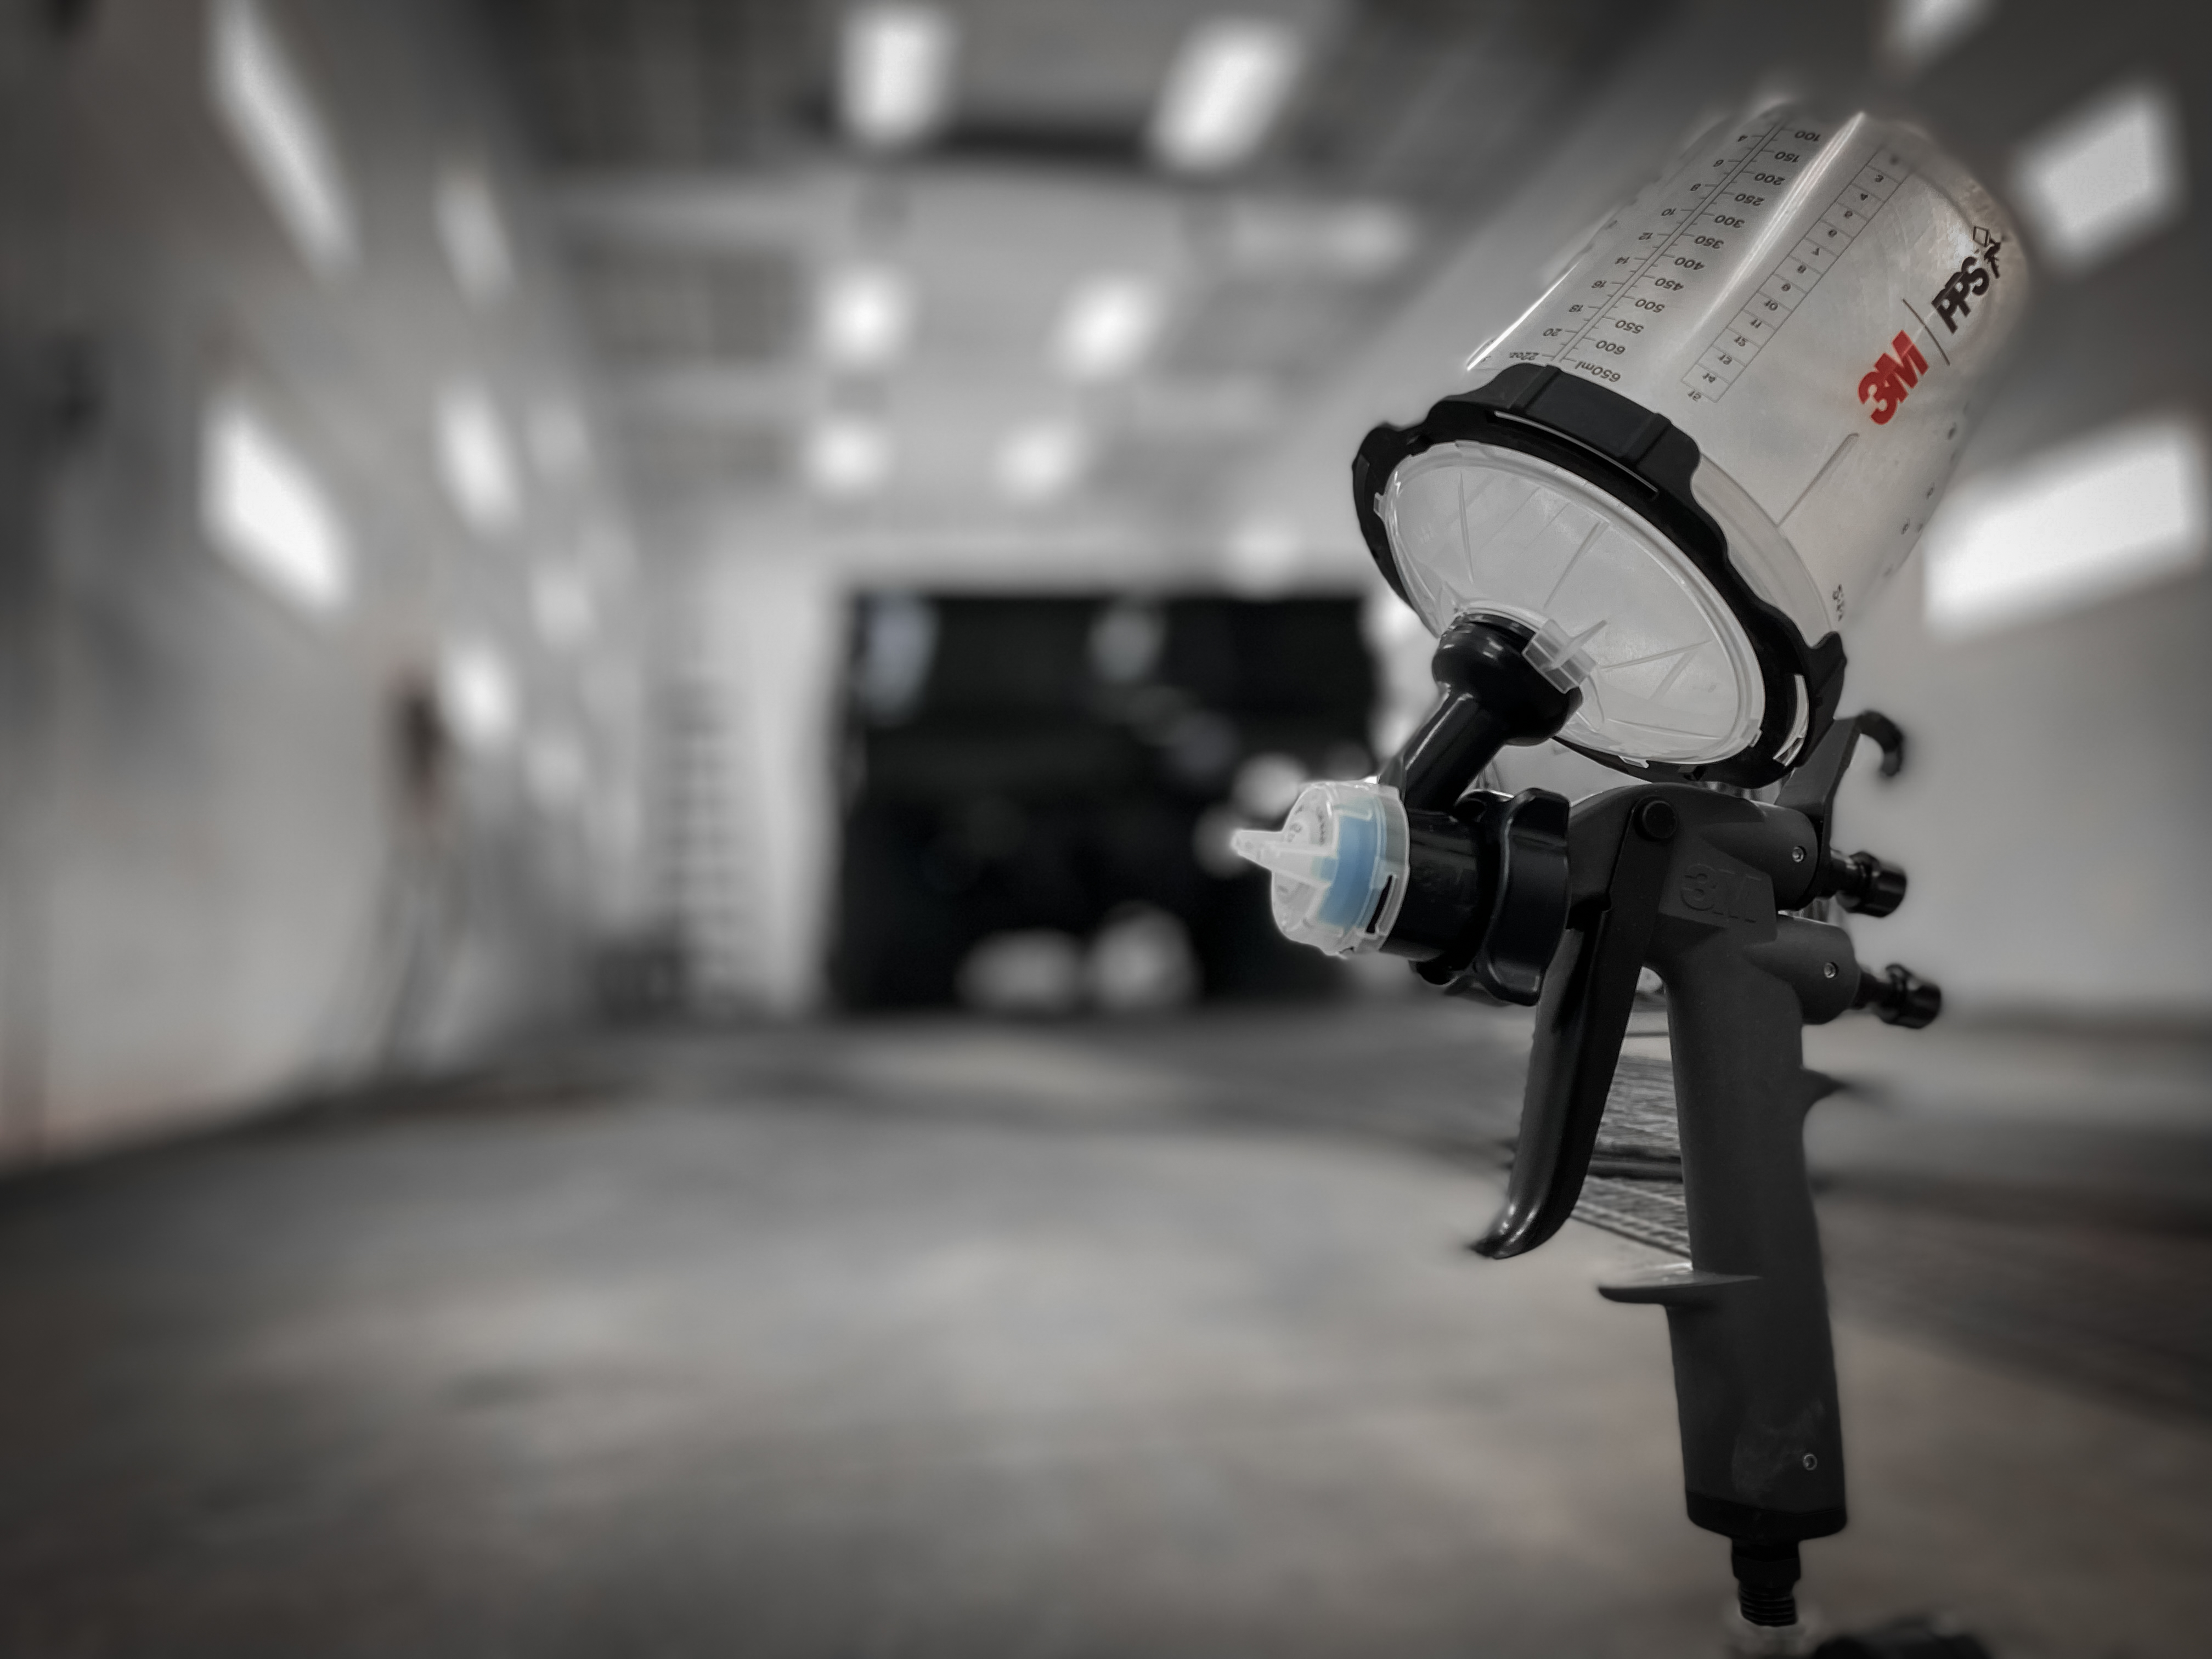 3M Performance Spray Gun is one of the lightest in the industry.